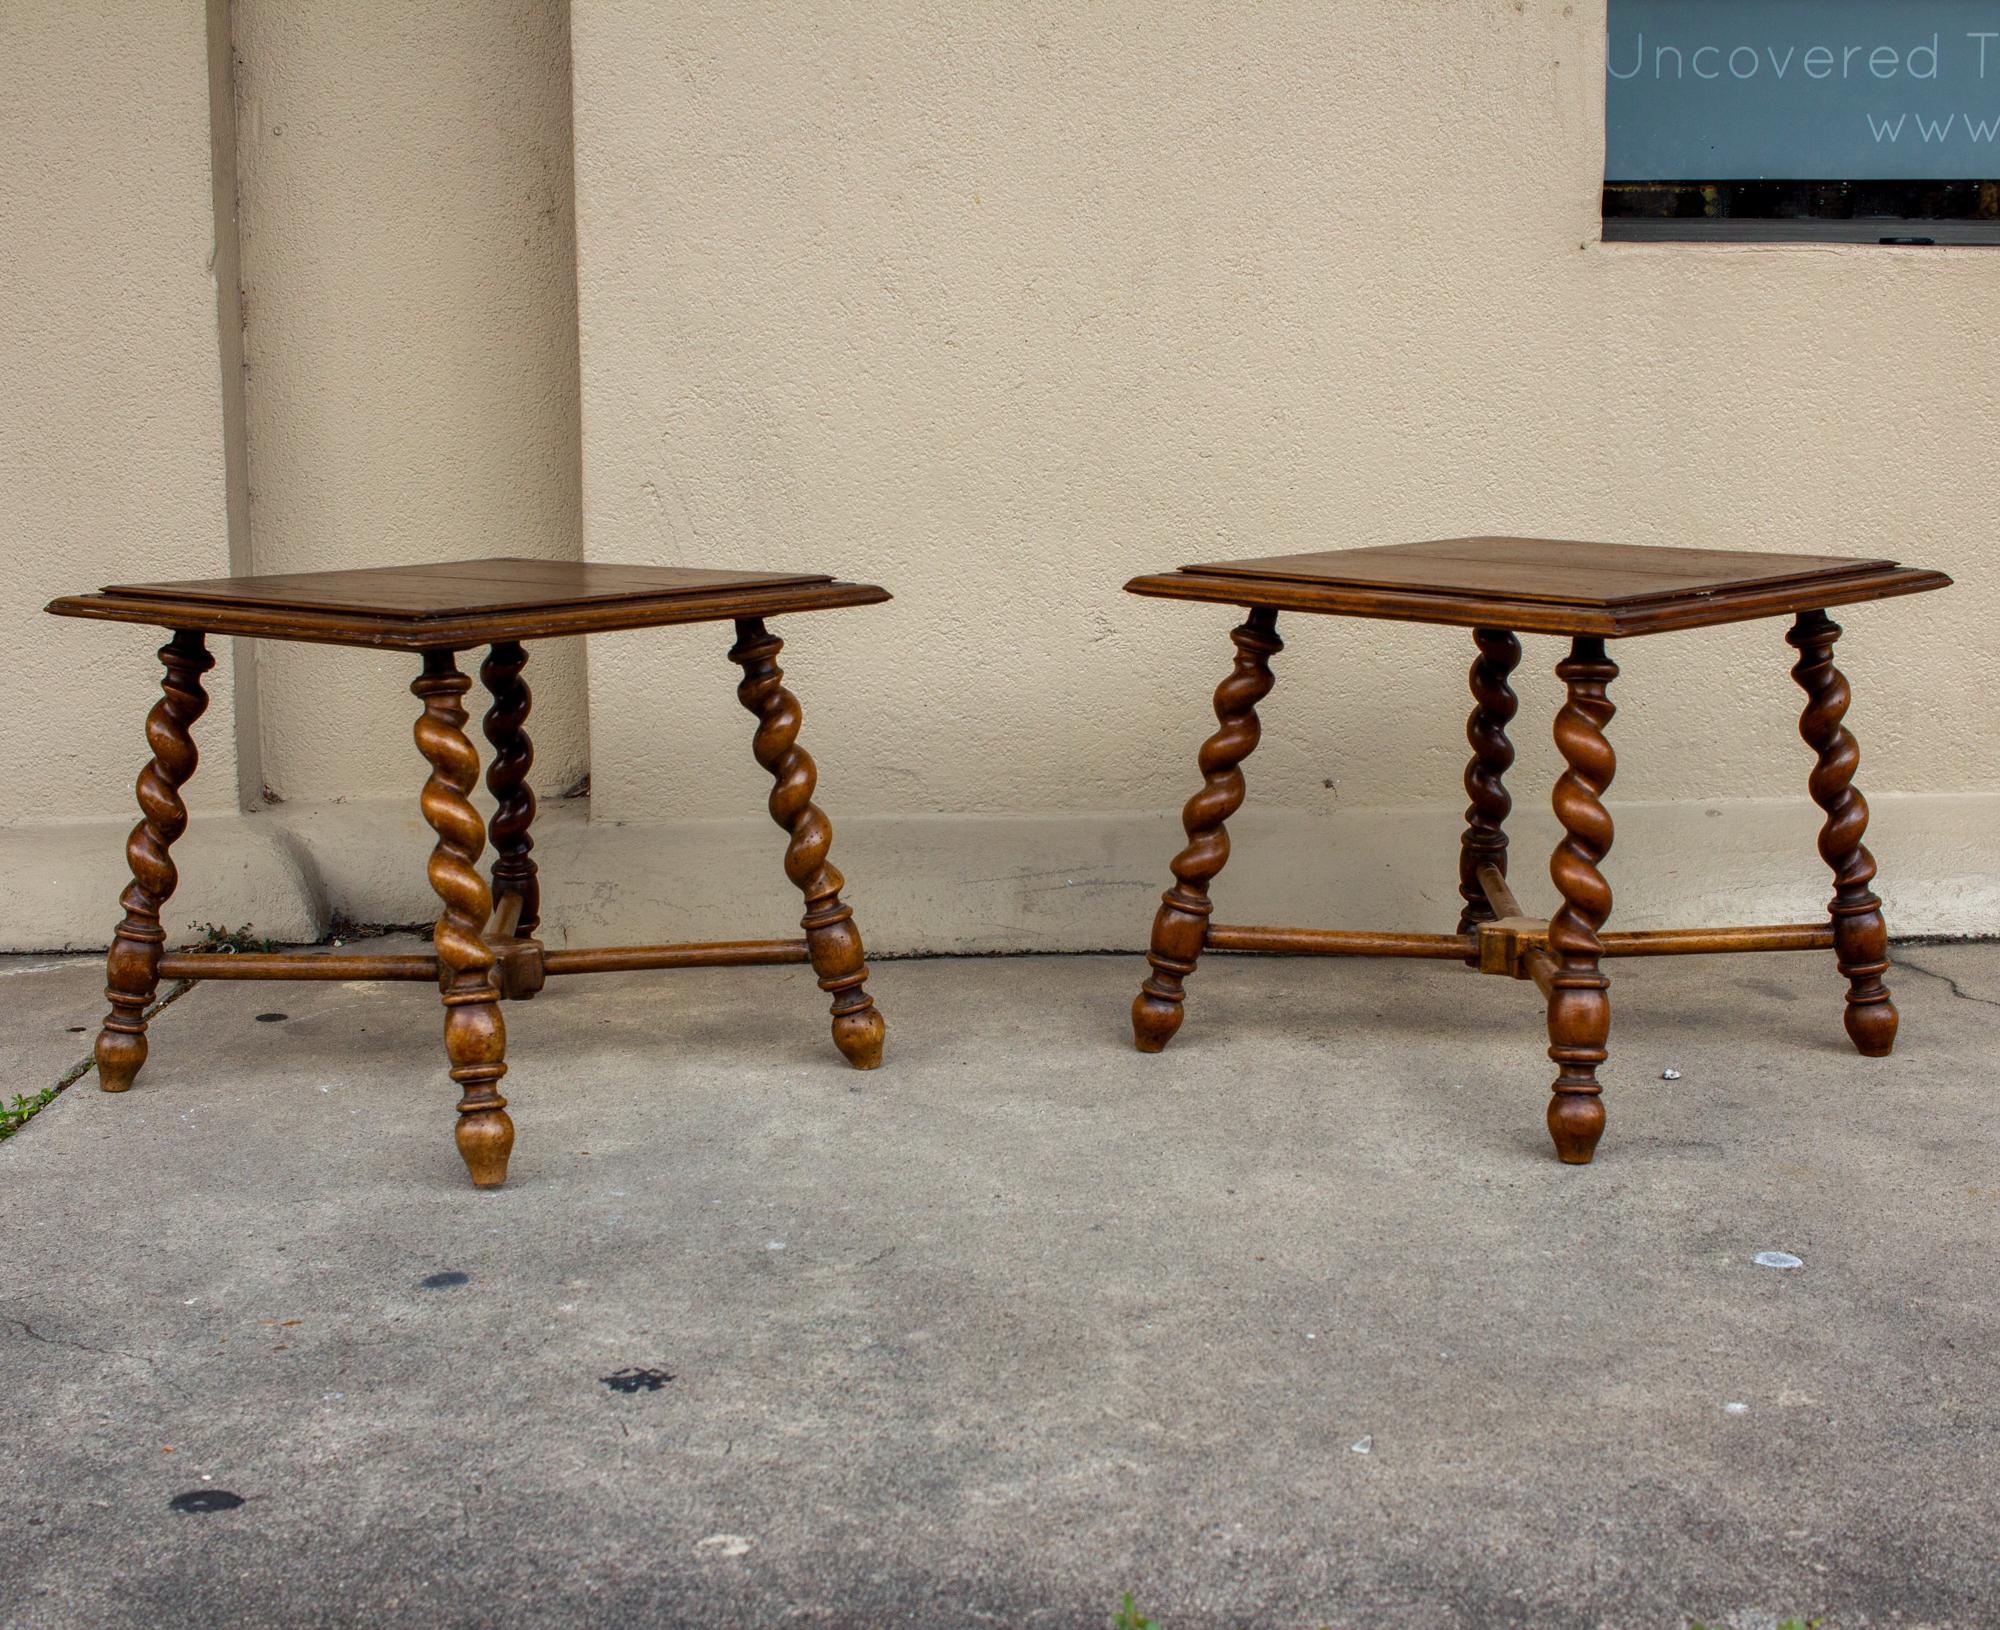 This pair of matching French wood side tables features barley twist legs and square tops. Their low structure is ideal for use as lamp tables. Each measures 18